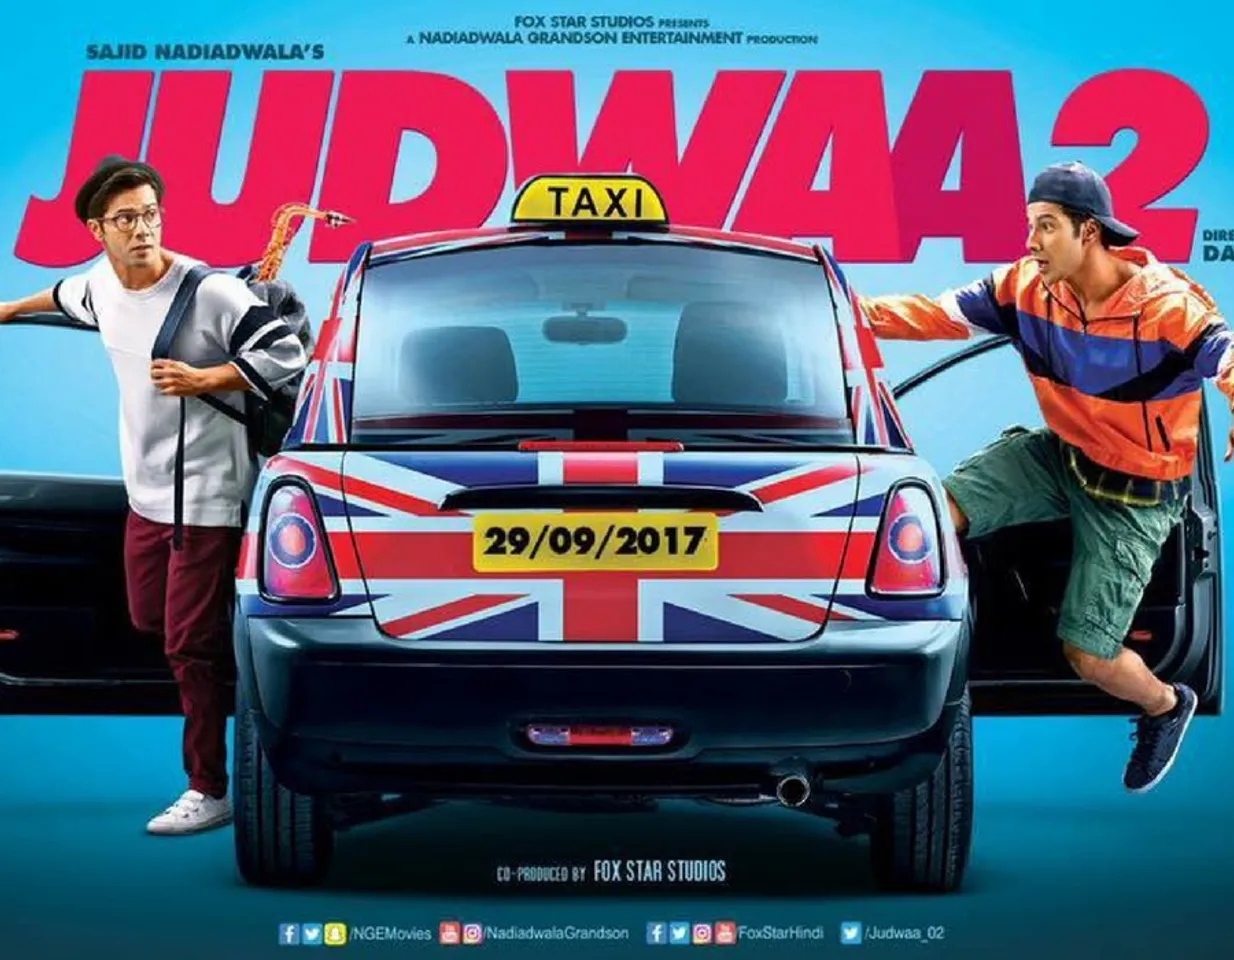 JUDWAA 2 POSTER IS OUT AND WE HAVE DETAILS ON THE TRAILER! FIND OUT HERE!